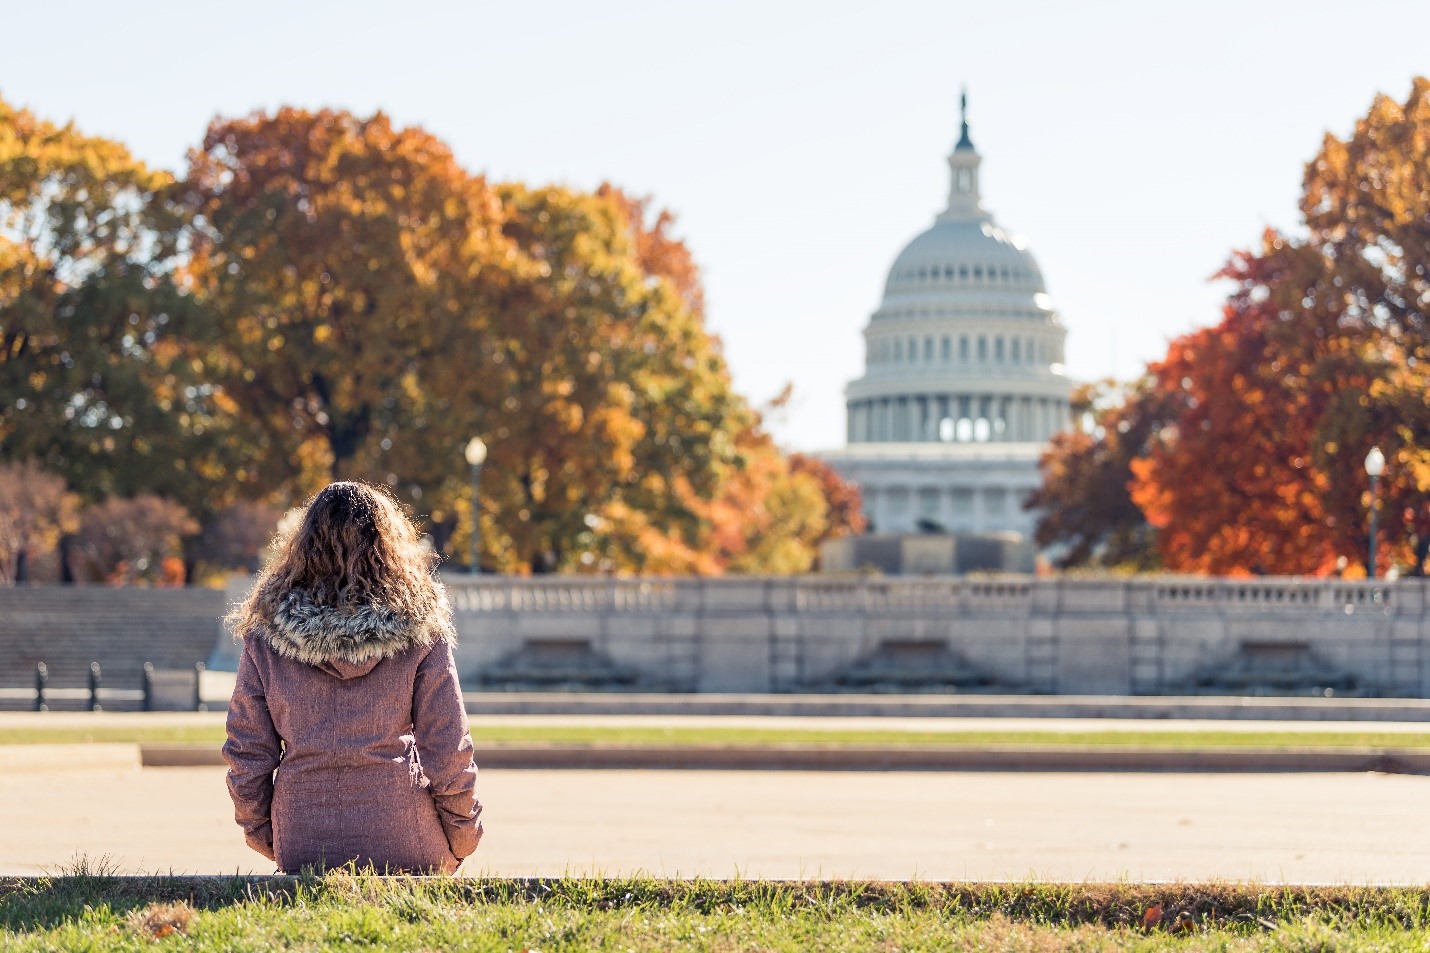 Woman in Washington DC sitting and looking at the U.S. Capitol